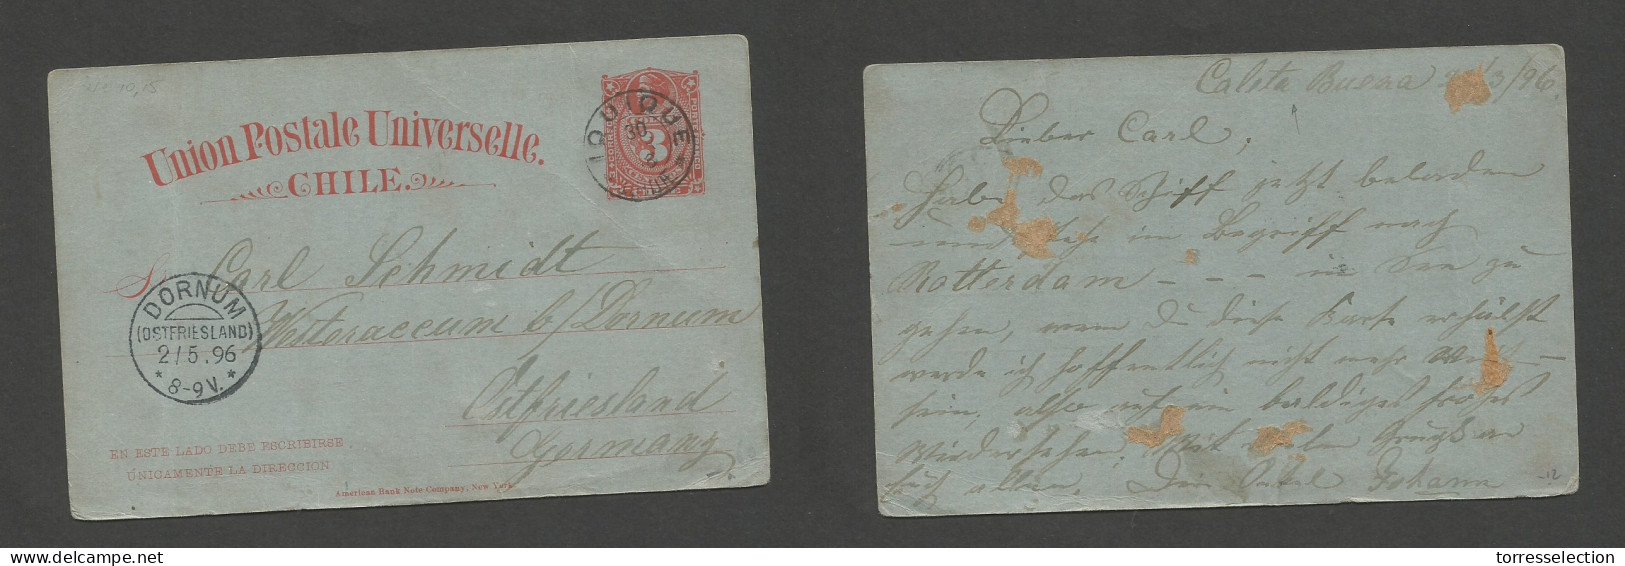 CHILE - Stationery. 1896 (22 March) Caleta Buena - Germany, Dorrum (2 May) Via Iquique (30 March) 3c Red / Bluish Stat C - Chili